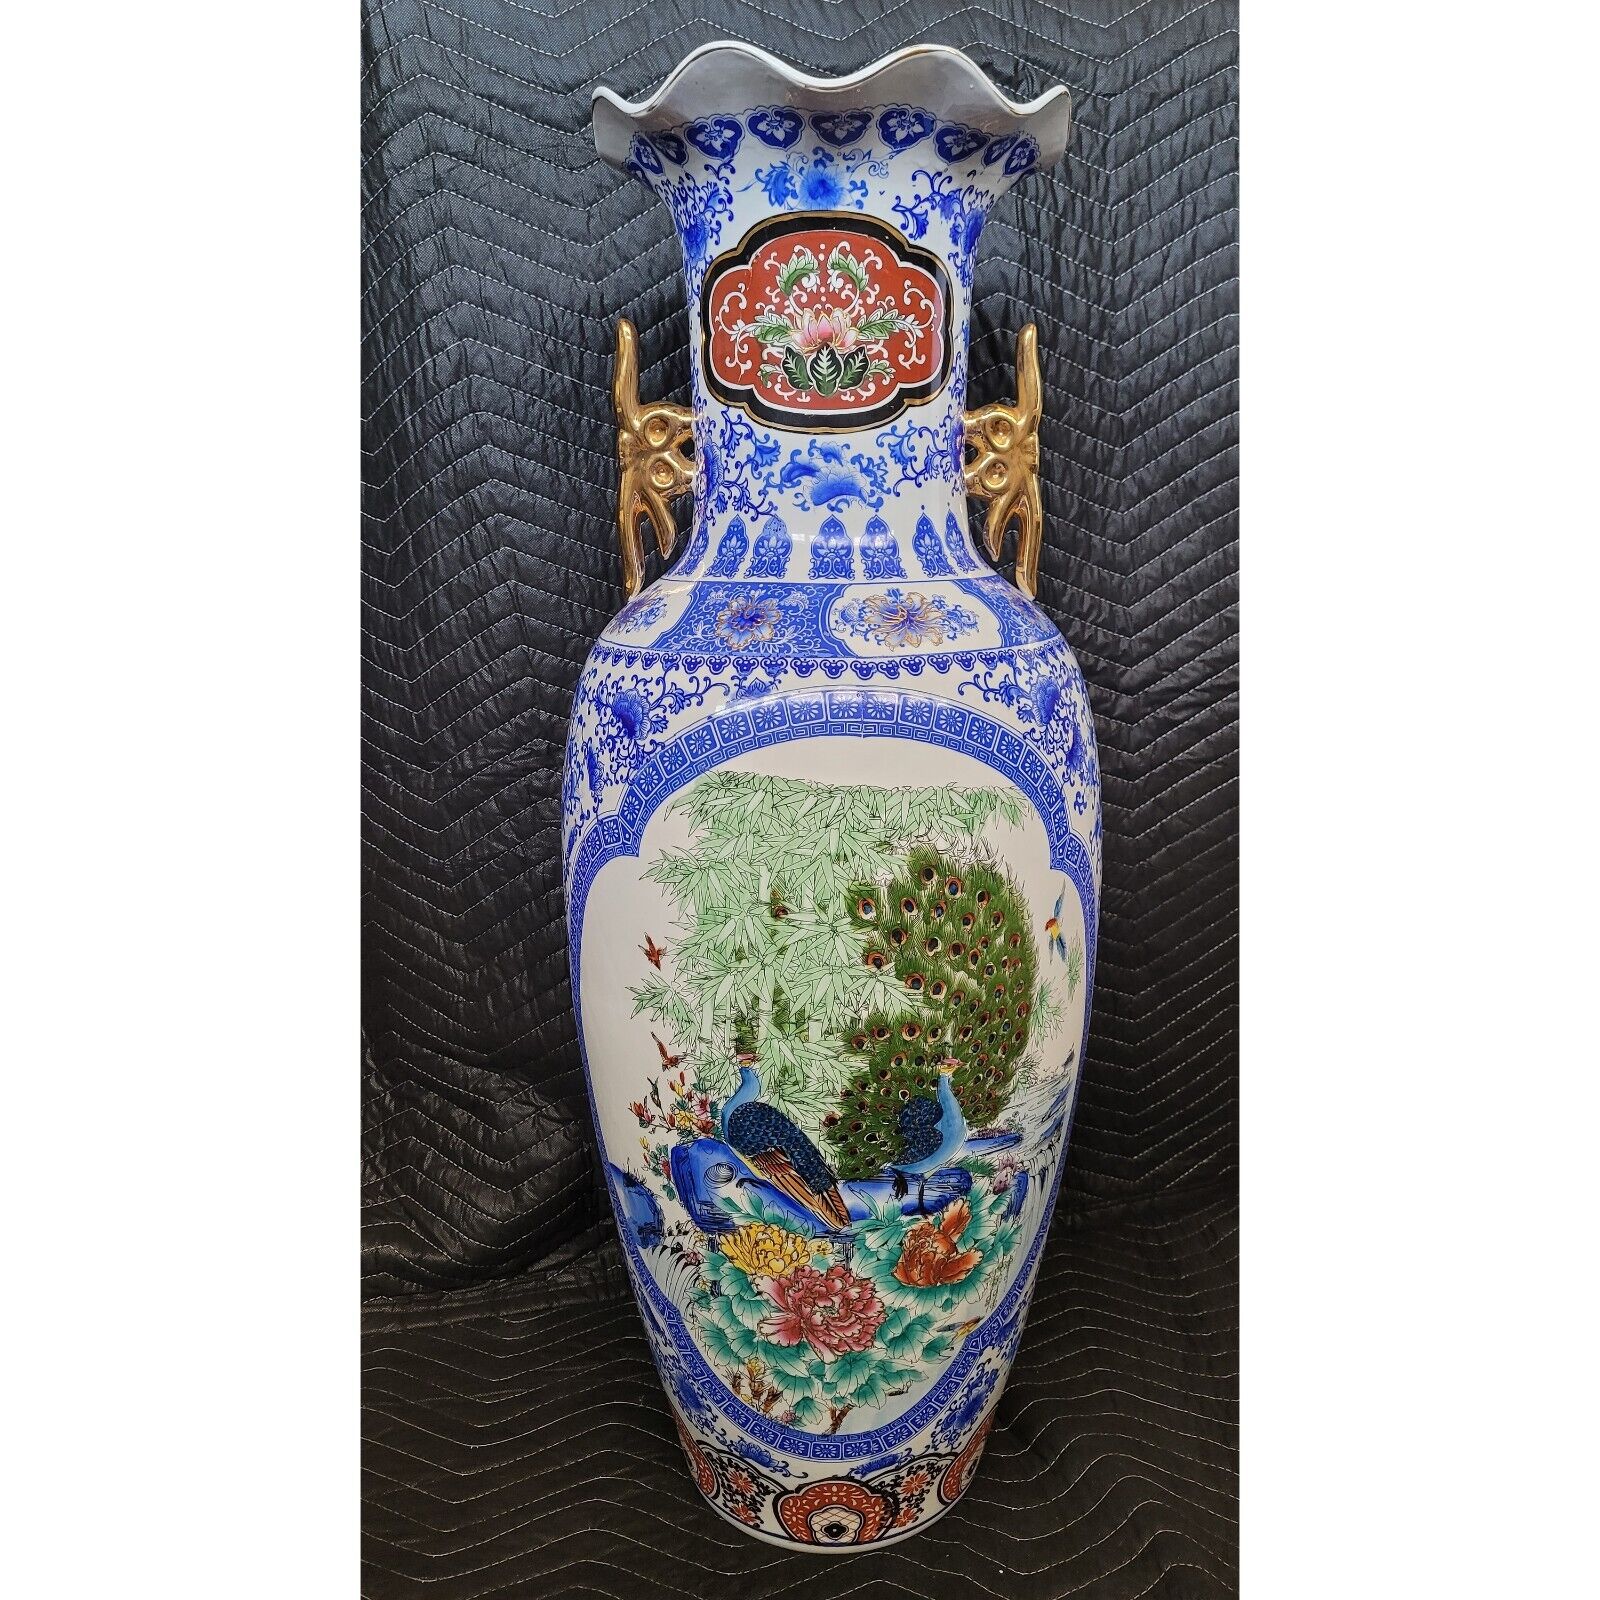 Vintage Chinese Floor Vase - Bird and Floral Theme 3' Tall